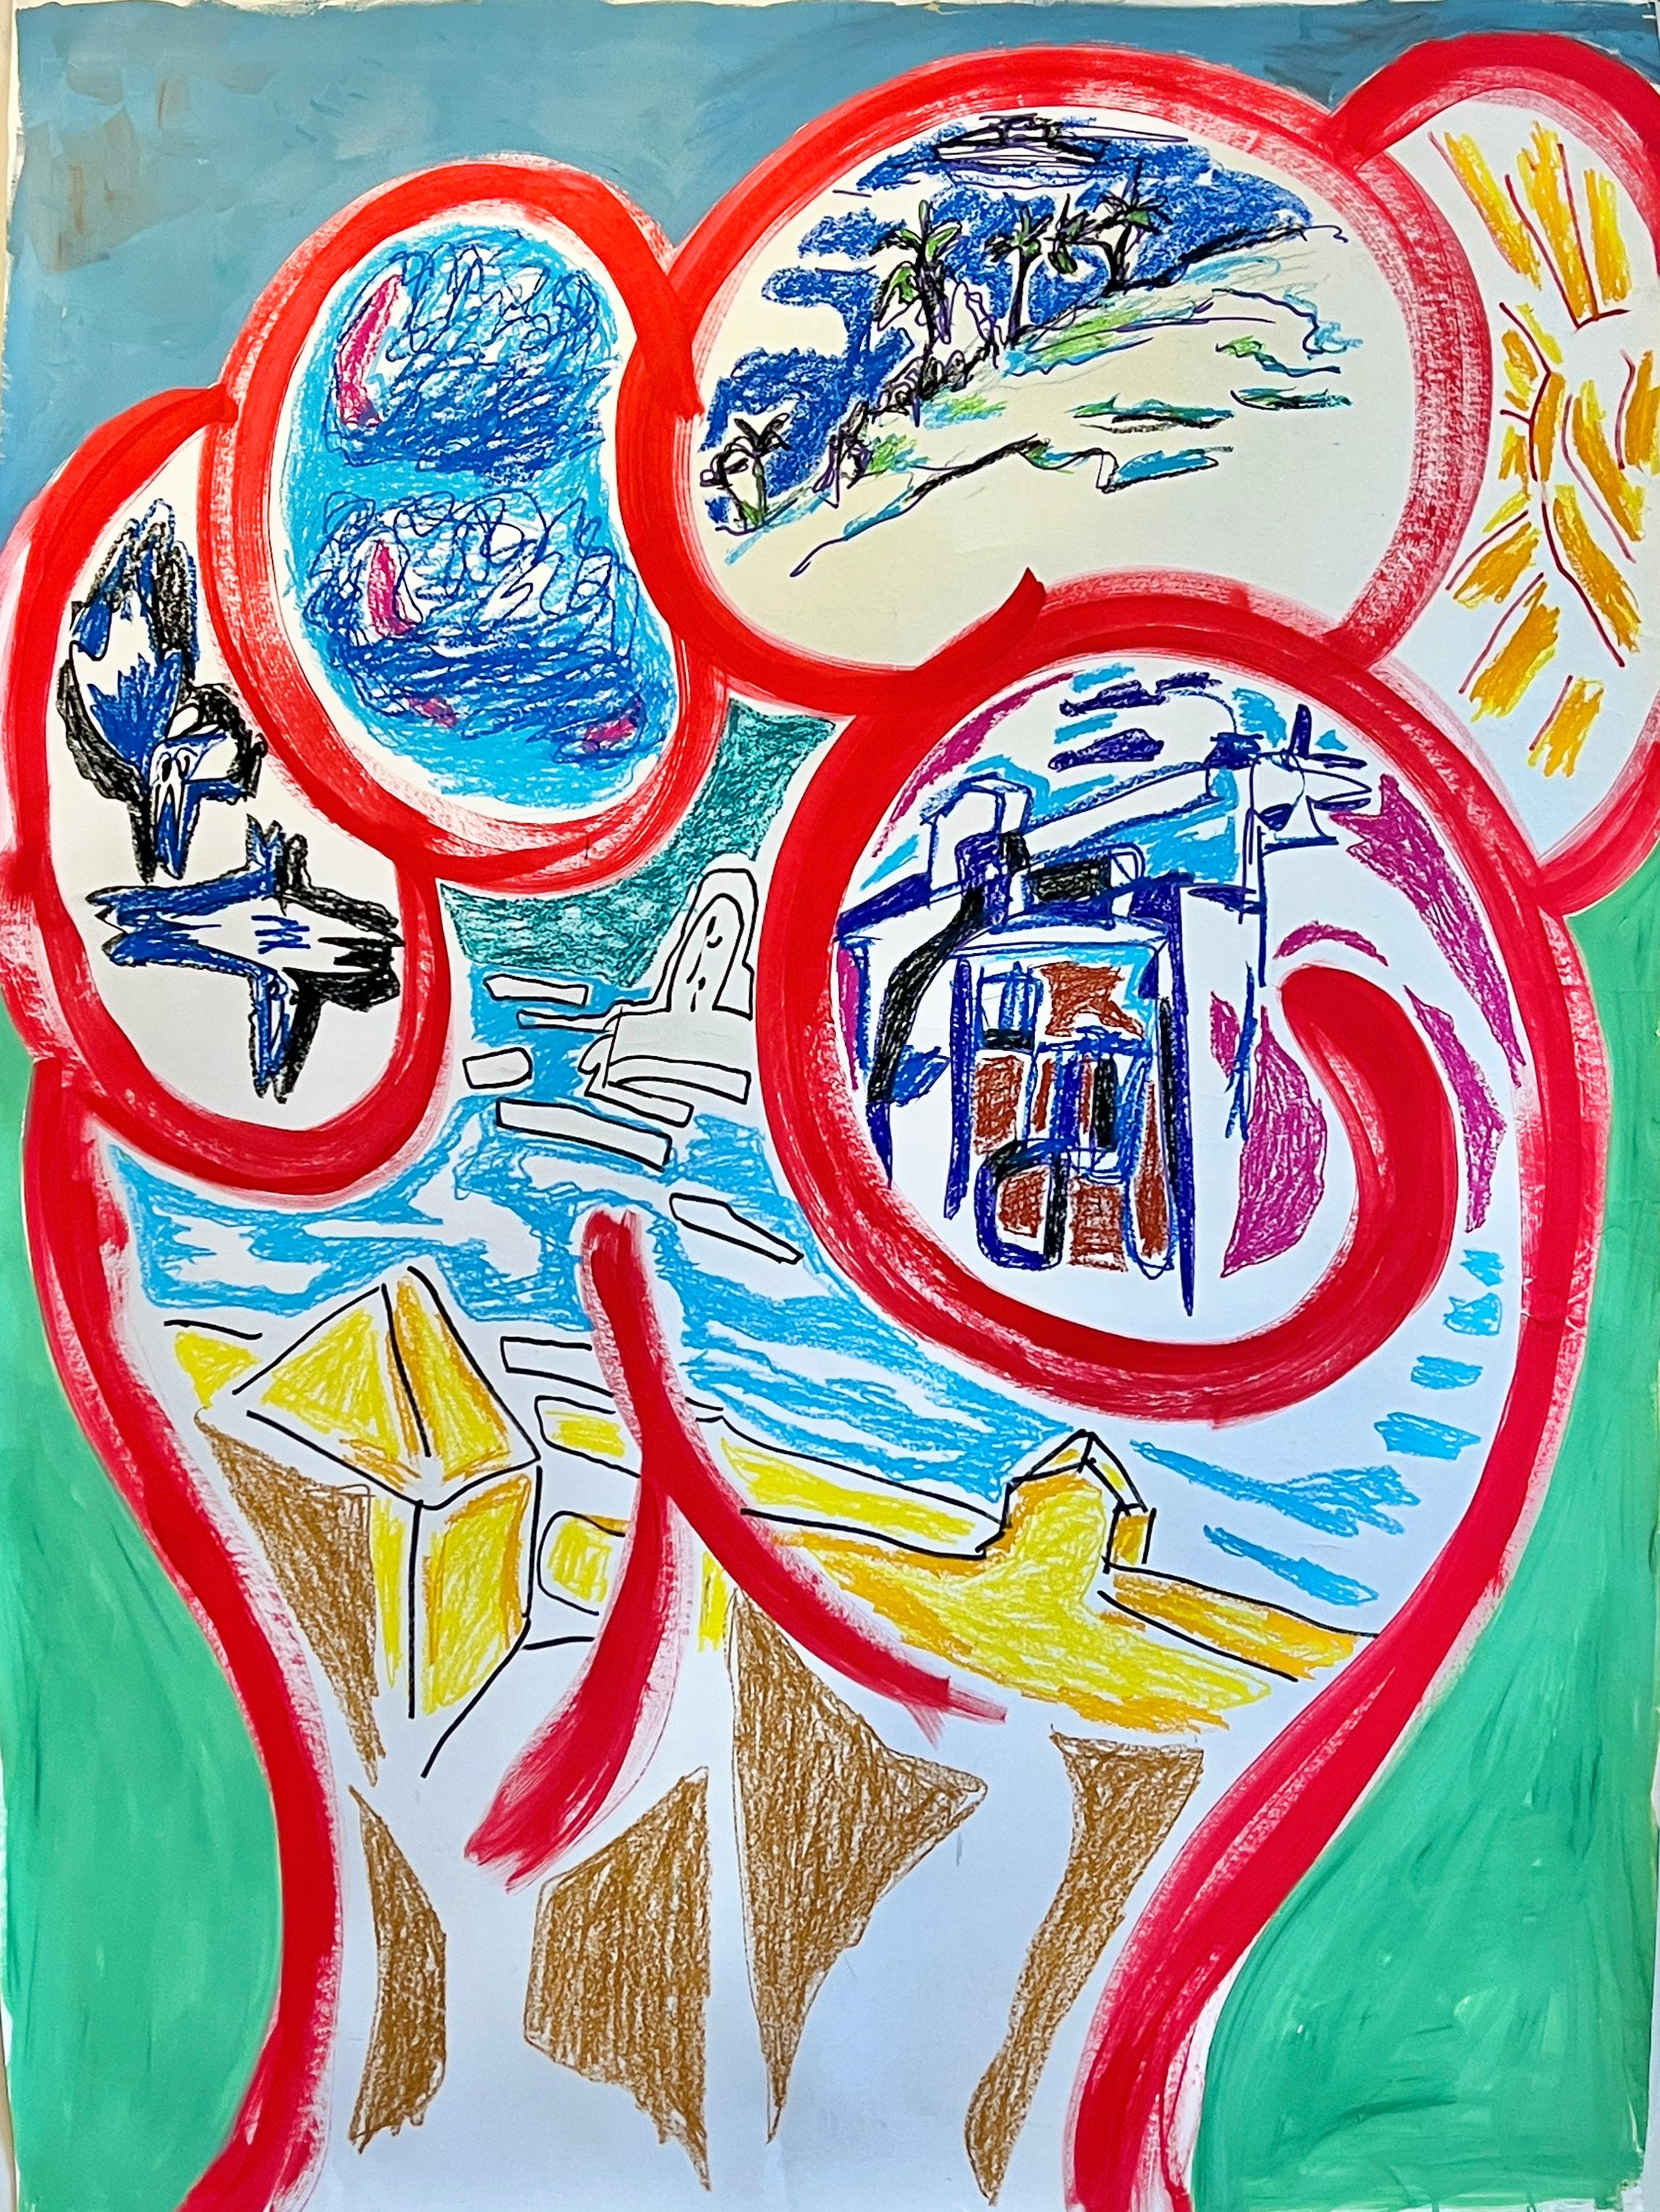 Renelio Marin Abstract Drawing - Hand Island: Large Contemporary Pop Art Drawing Acrylic and Pastel